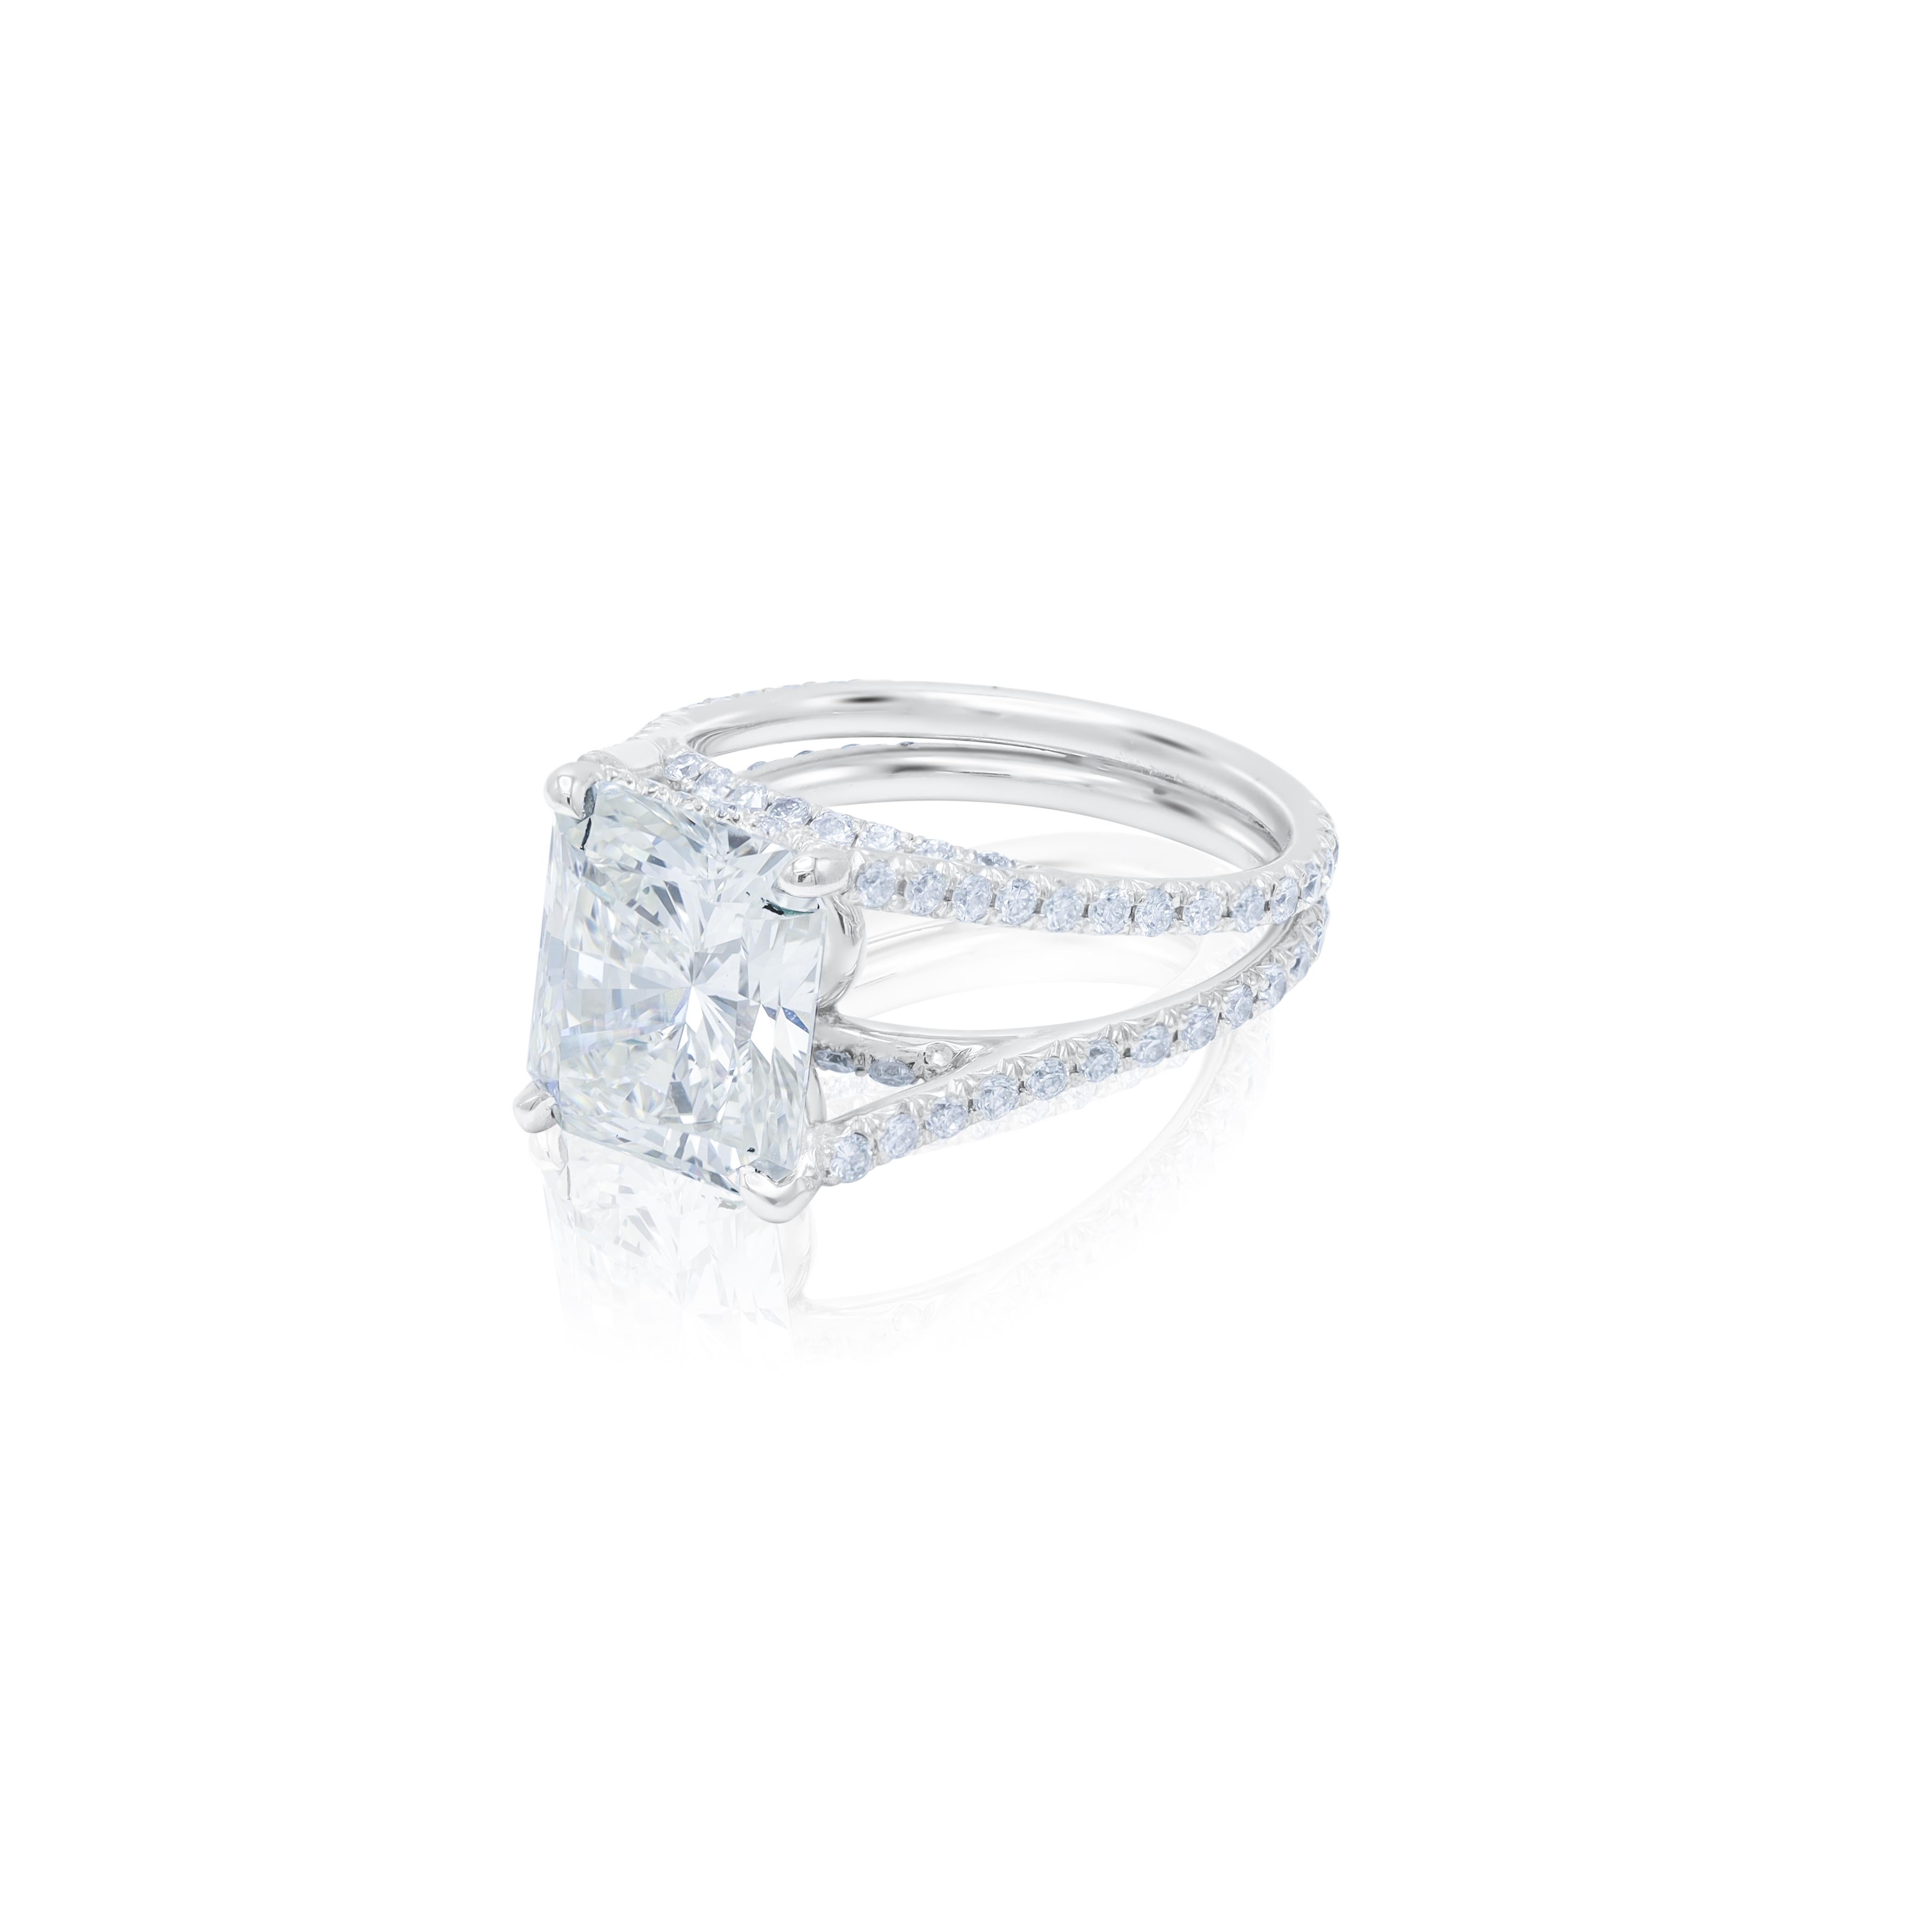 Platinum diamond ring featuring a center (J-IF) 4.18 ct radiant cut diamond with 0.90 cts tw of round diamonds adoring the split shank band
Diana M. is a leading supplier of top-quality fine jewelry for over 35 years.
Diana M is one-stop shop for